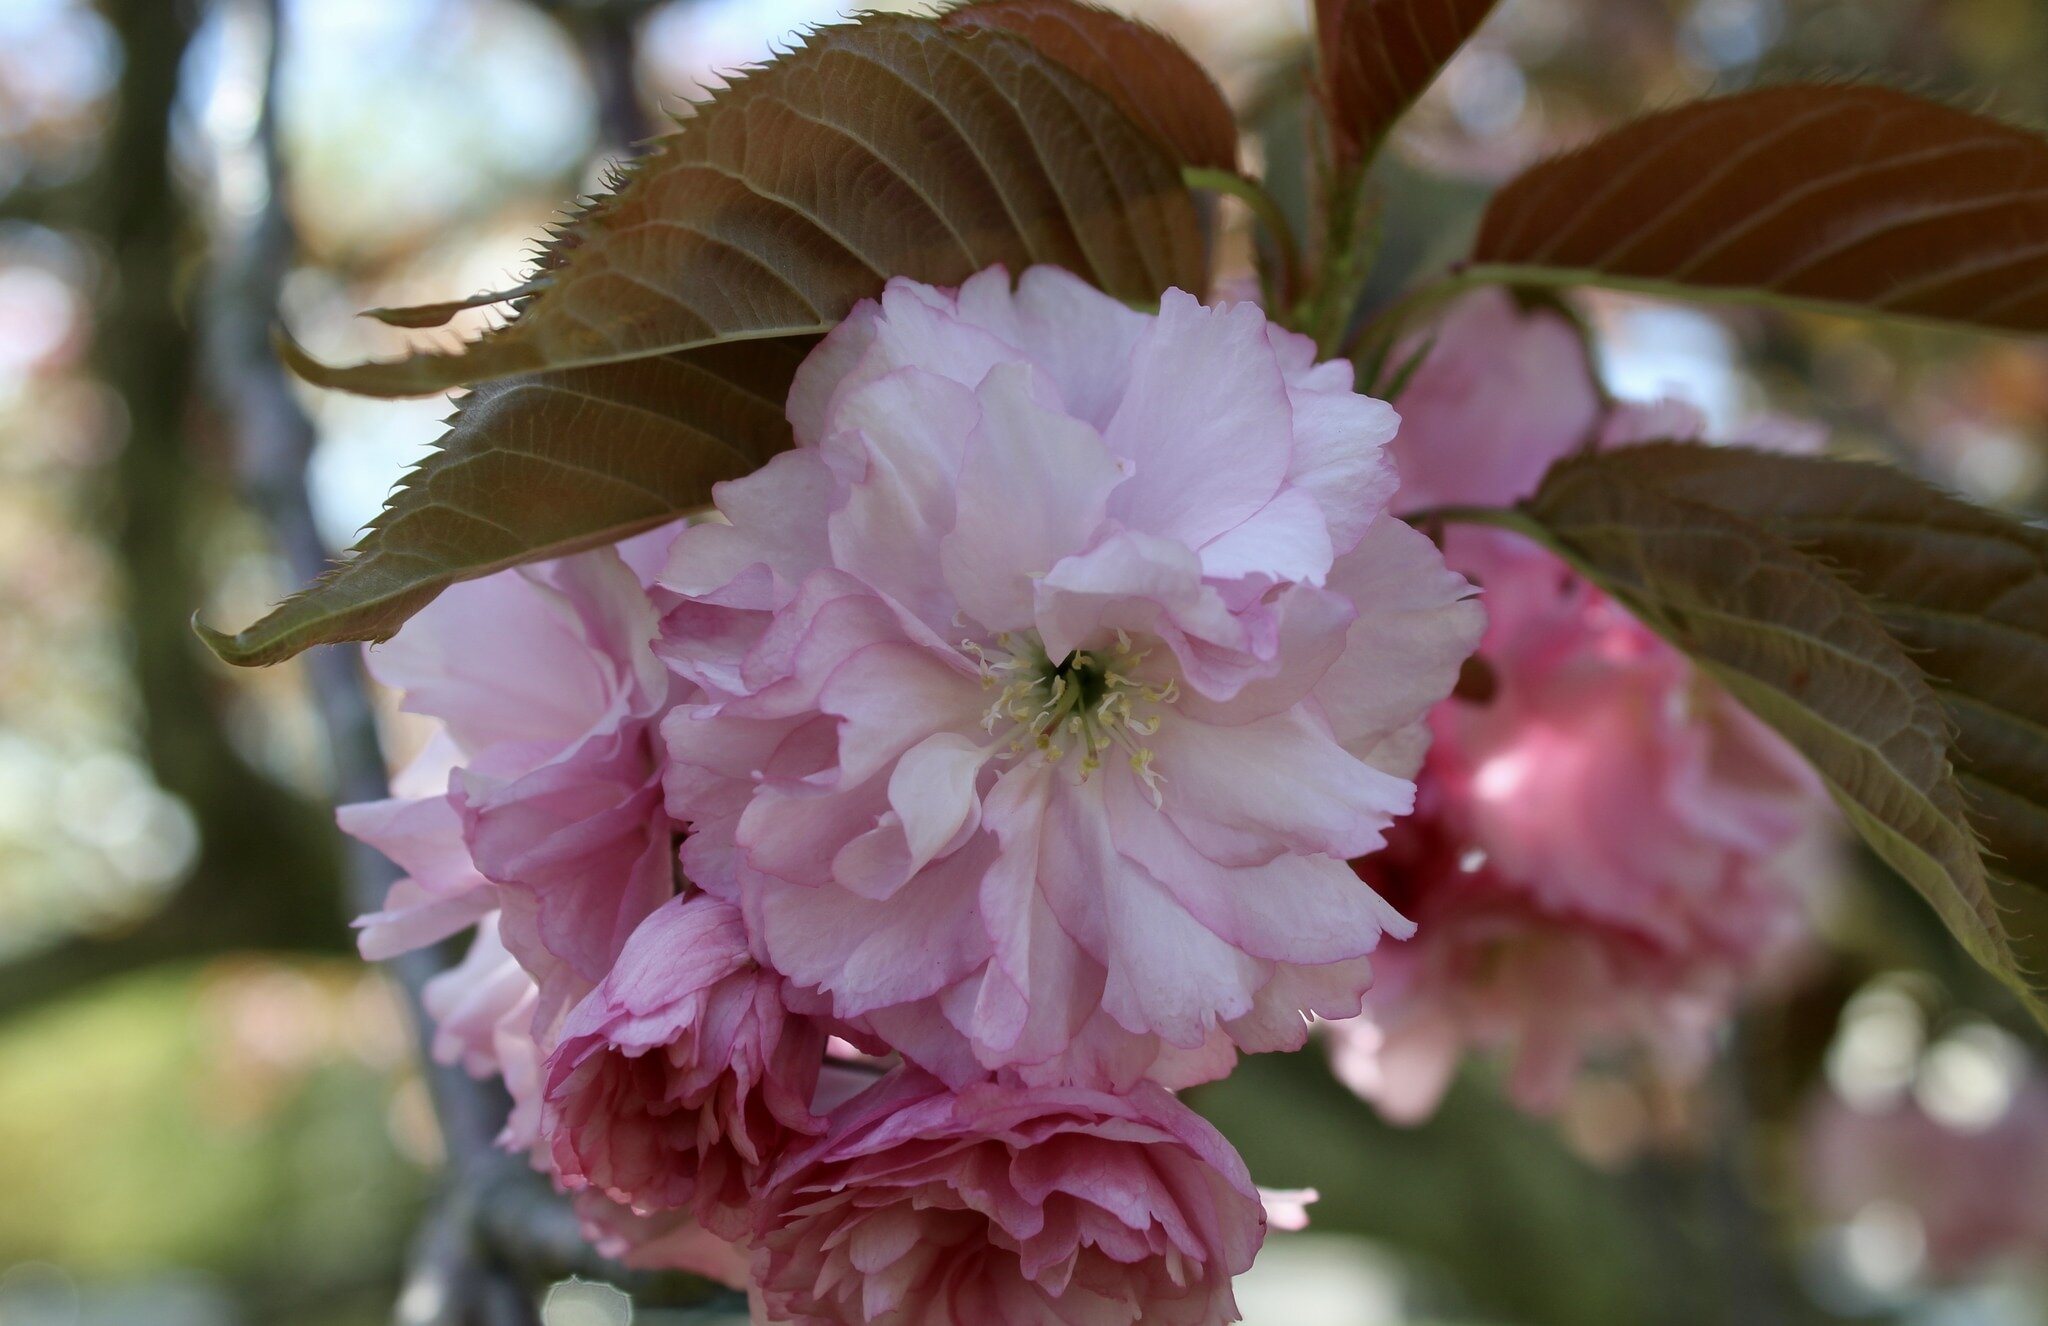 Reaching out over the small parking lot behind the Newport Art Museum, the eye-catching Kwanzan cherry (Prunus serrulata &lsquo;Kwanzan&rsquo;), or Japanese flowering cherry, is this week&rsquo;s chosen tree. A very common flowering tree, perhaps too